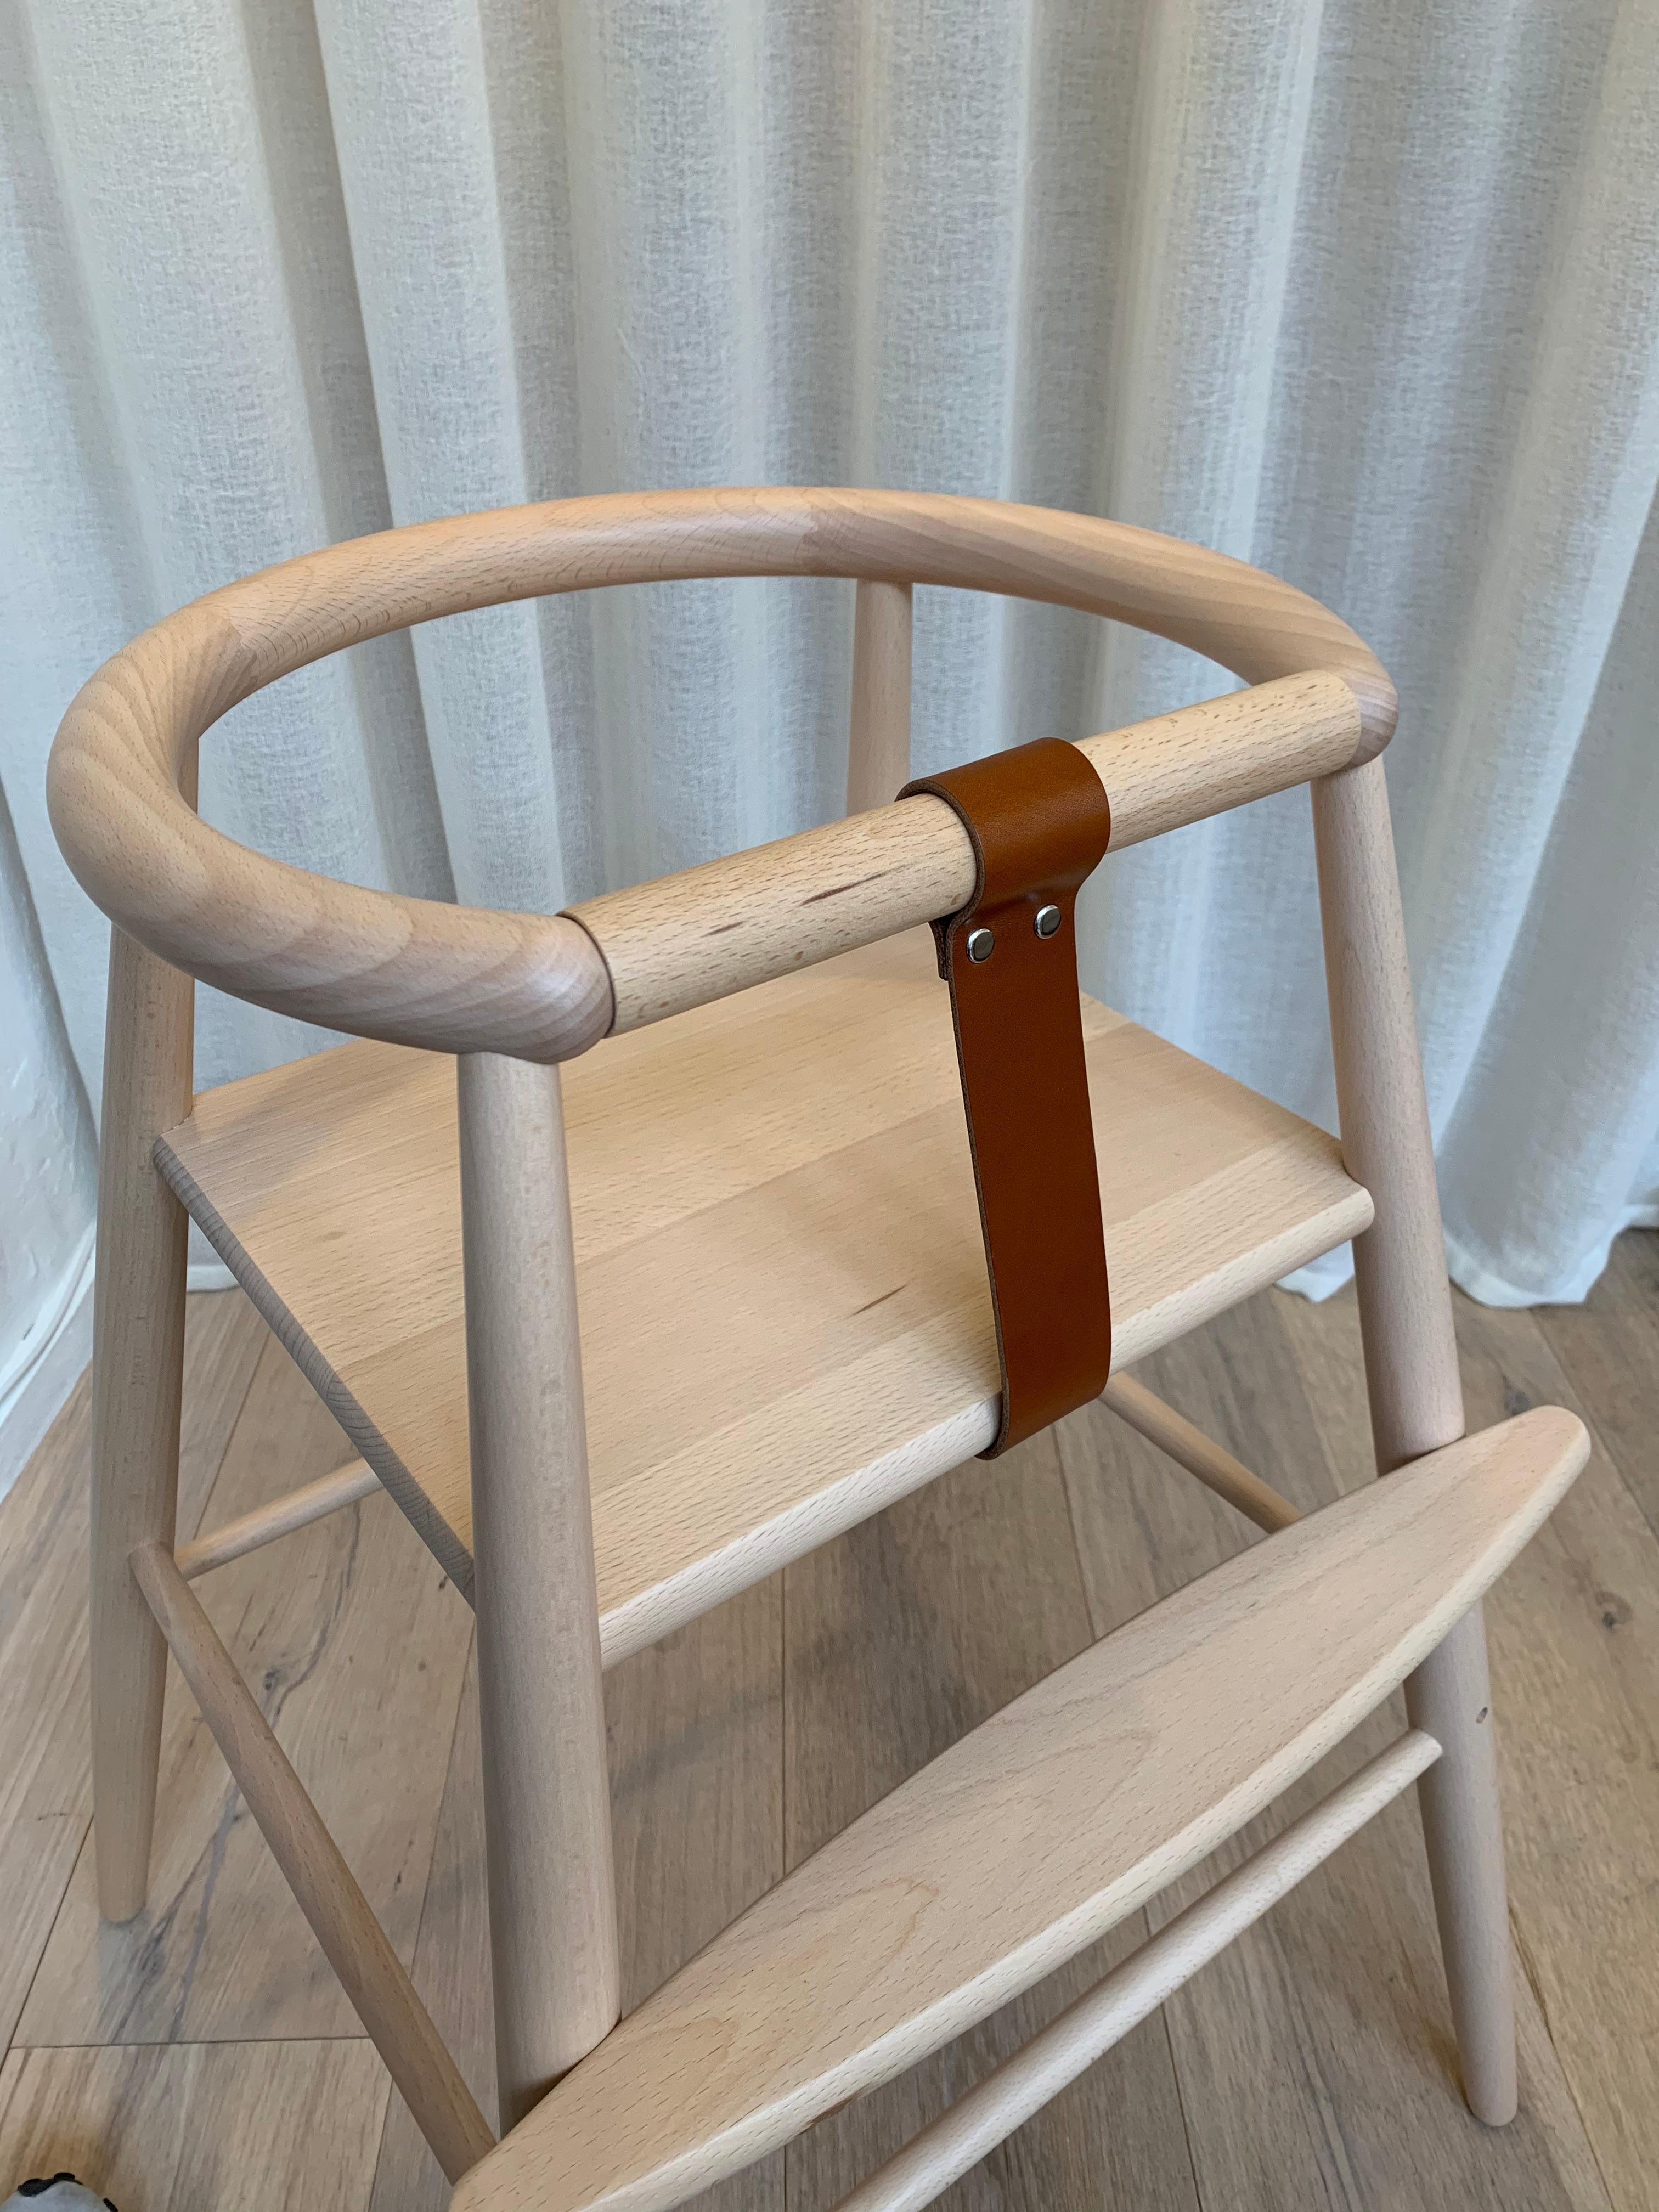 Nanna Ditzel’s ND54 high chair, originally designed in 1954, is a beautiful and enduring piece of design, adaptable to the needs of growing children. Minimalist and sturdy, the FSC™-certified beech wood chair can be used by children up to 15 kg,